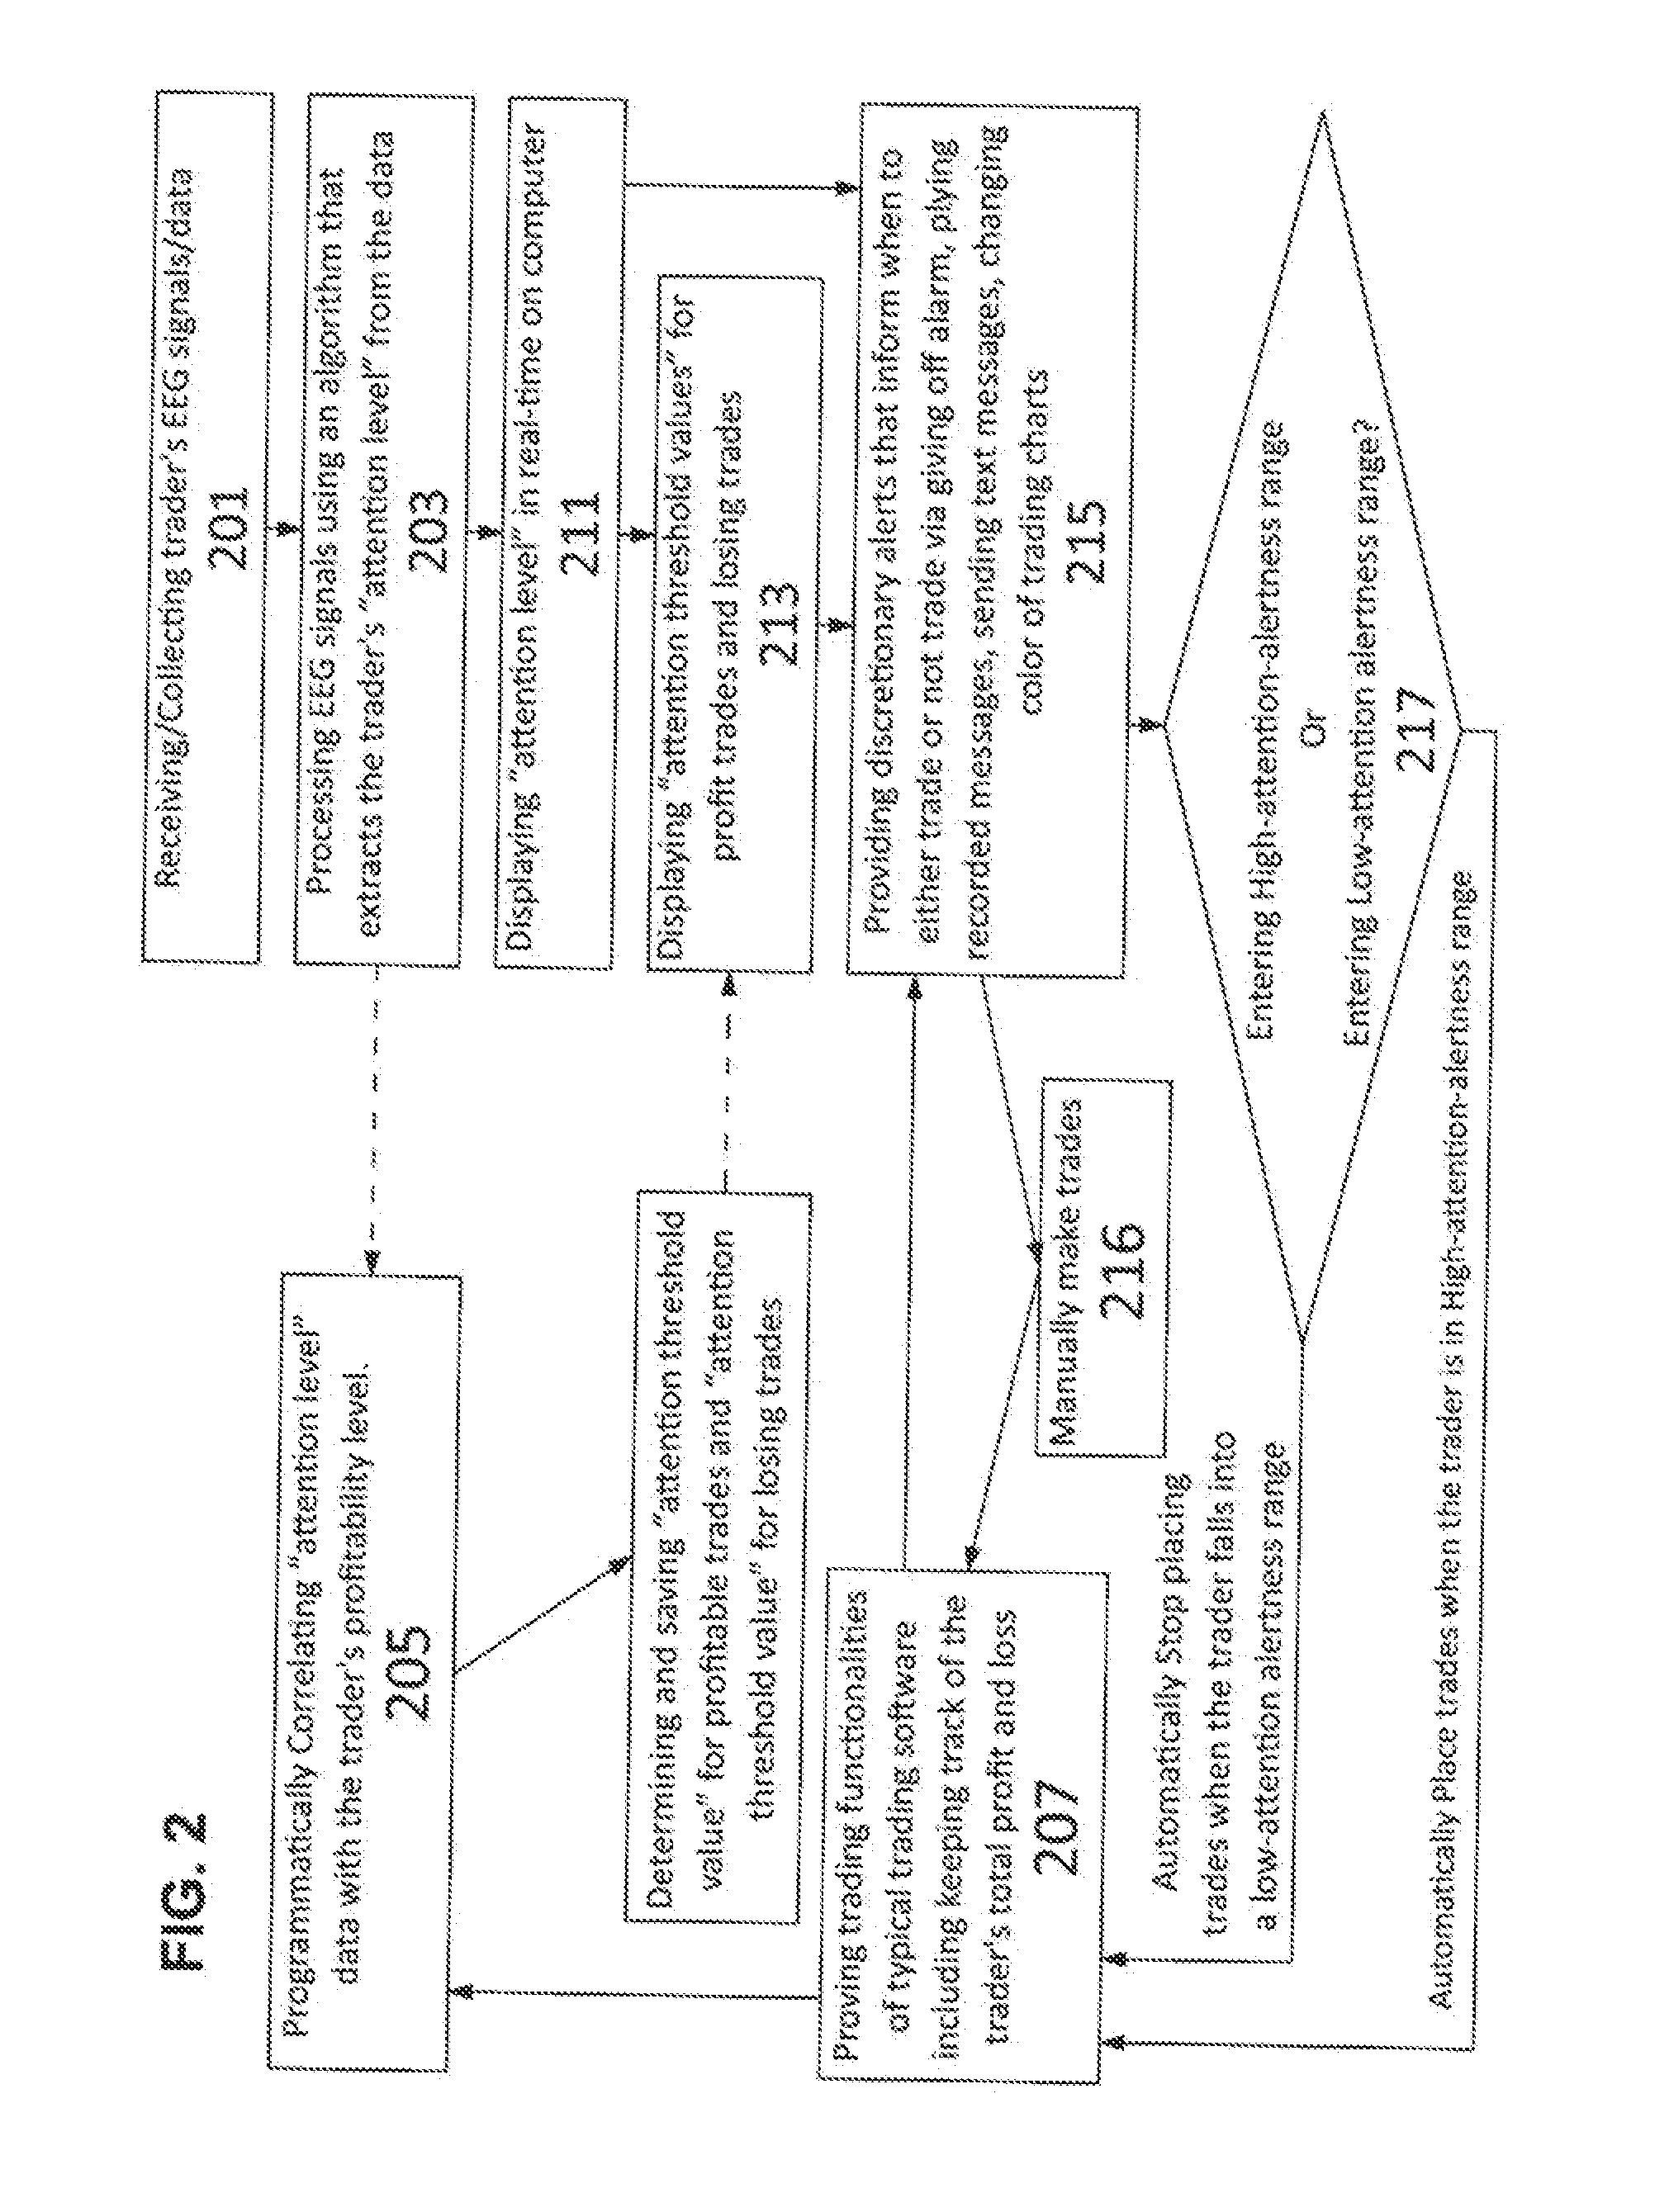 Method and system to provide investment traders biofeedback in Real-Time during the decision time immediately prior to make or not make a transaction